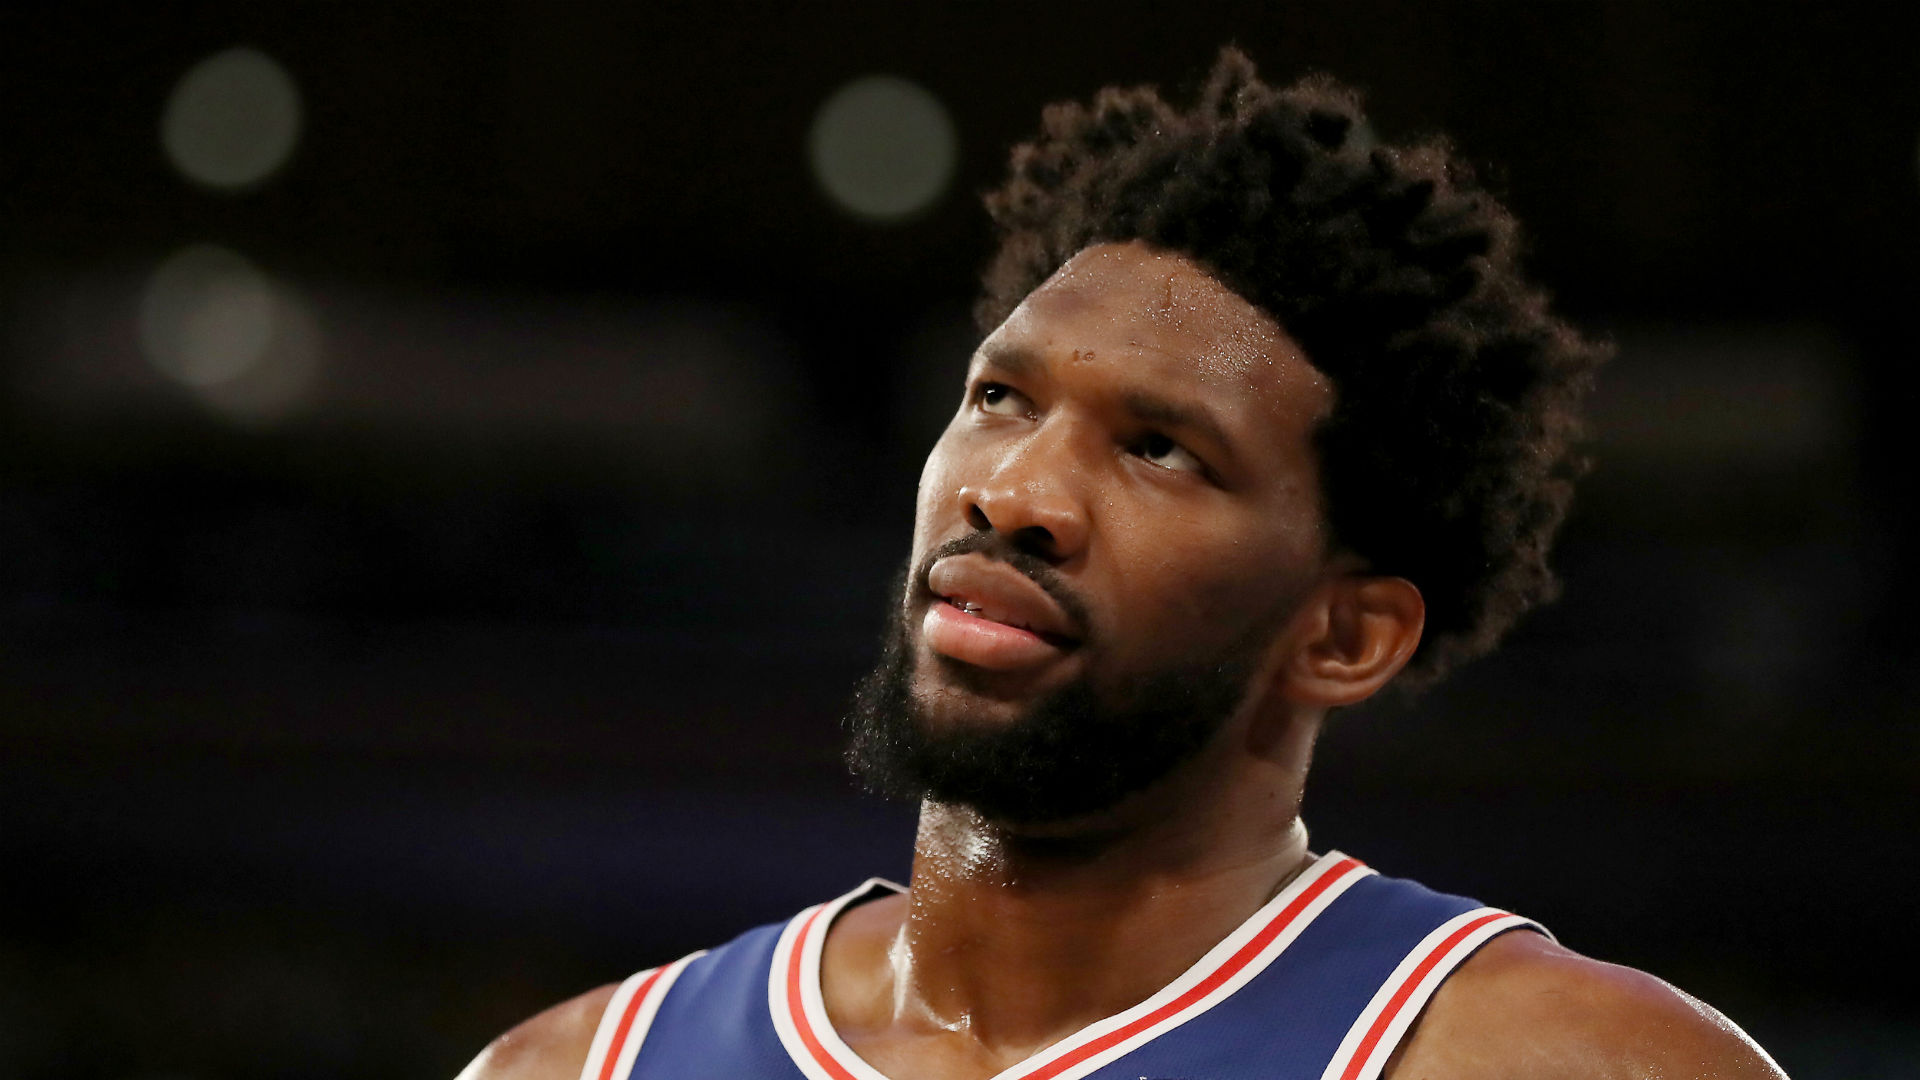 The Philadelphia 76ers used the ejection of Marcus Smart to come from behind and beat the Boston Celtics, says Joel Embiid.